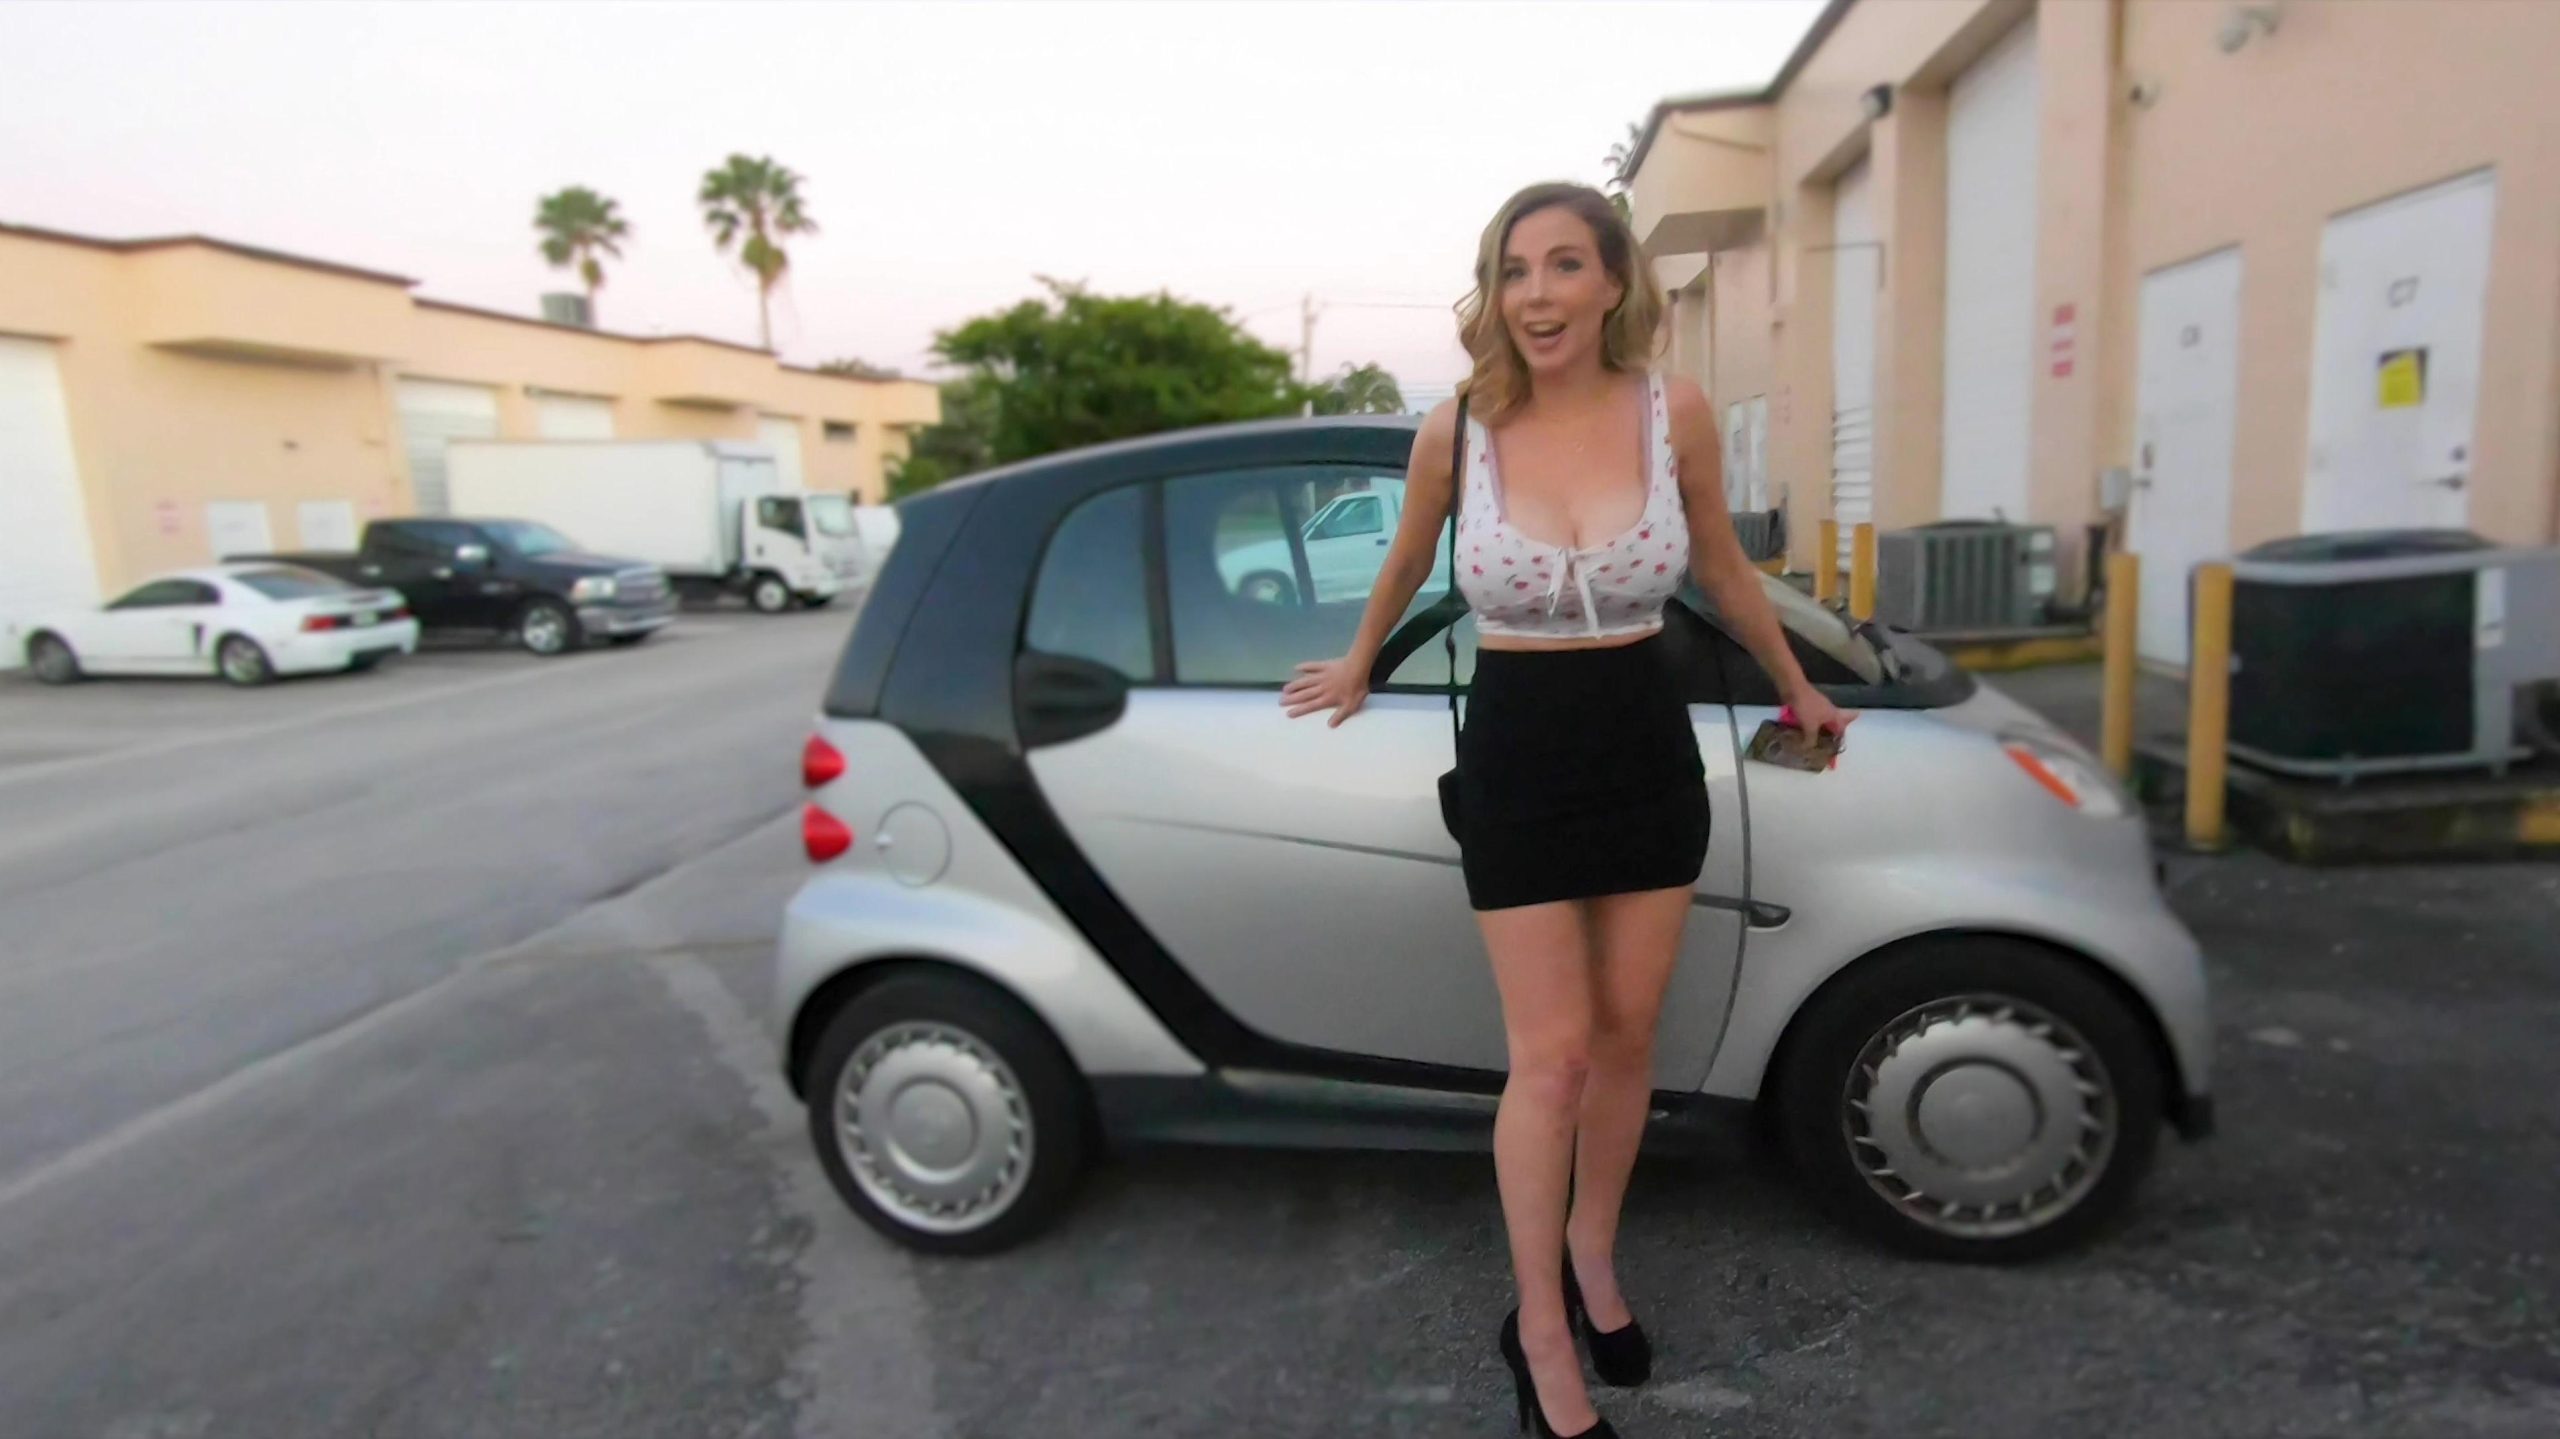 Blake Blakely Wants To Sell Her Car And Be A Movie Star